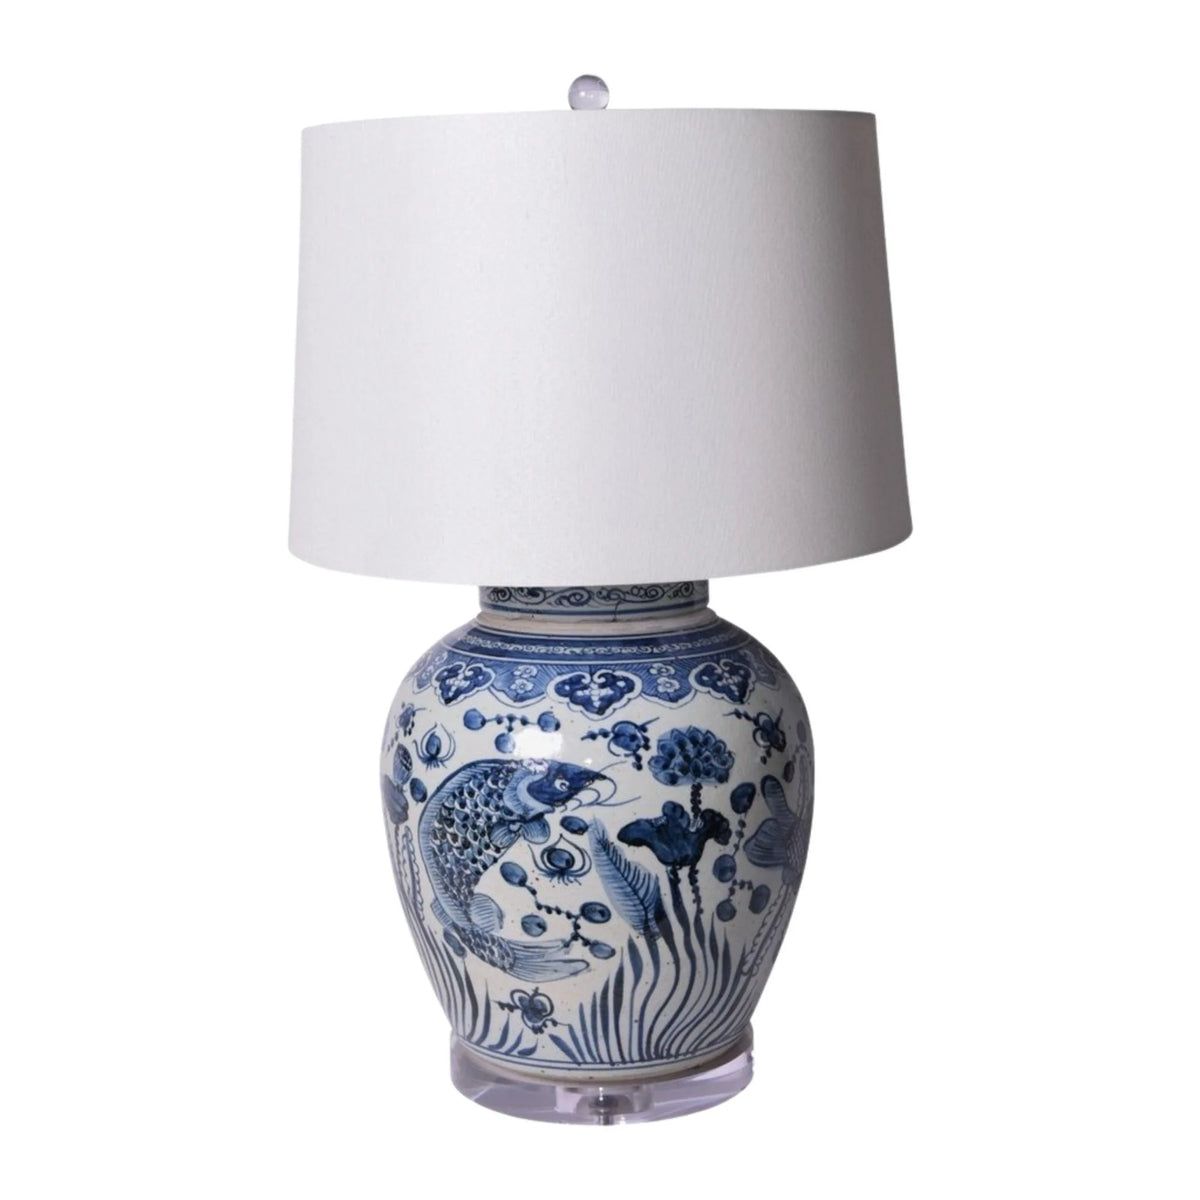 Blue and White Porcelain Table Lamp With Ancestor Fish Design | The Well Appointed House, LLC